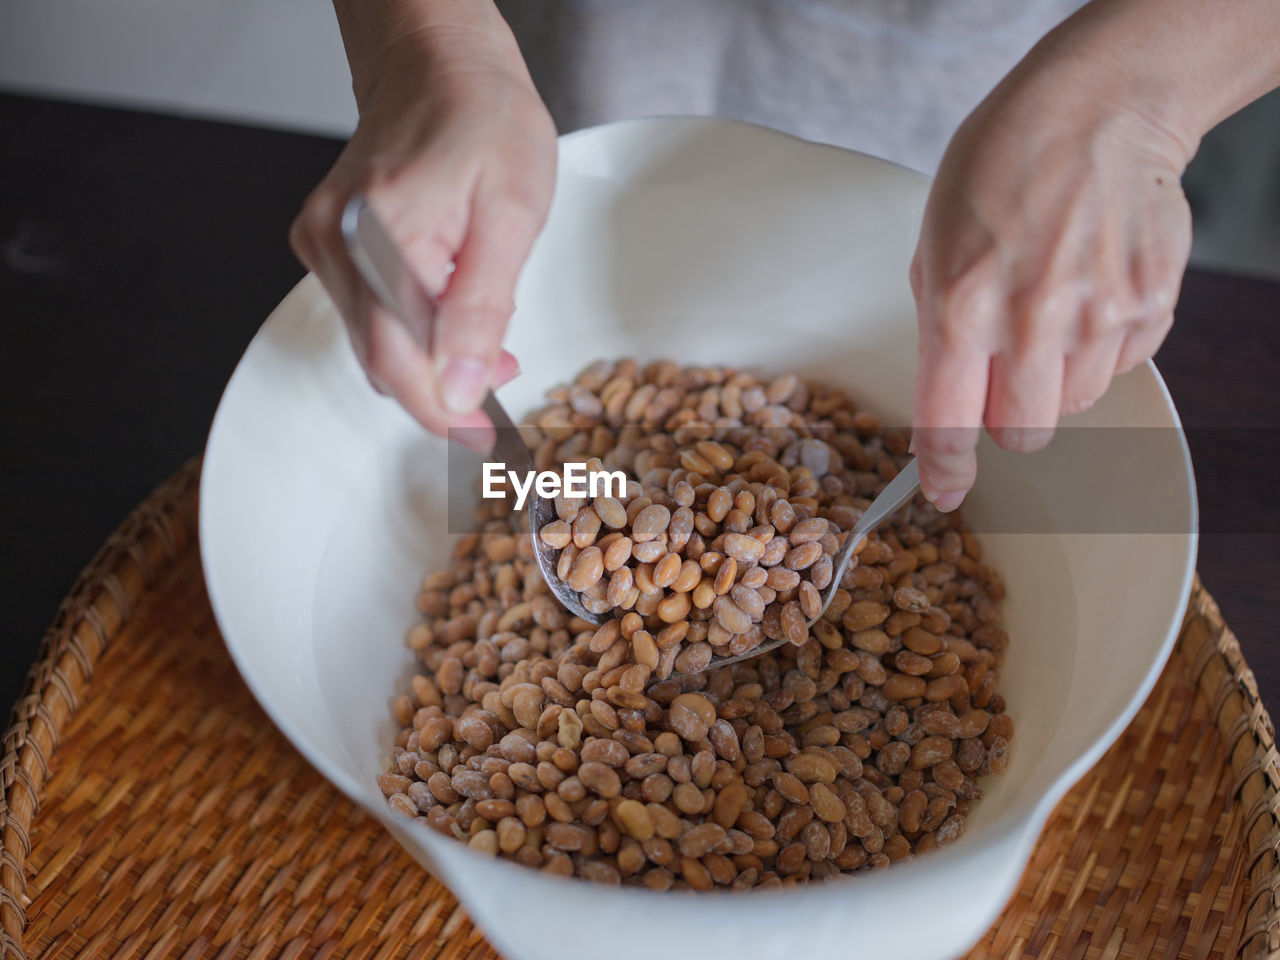 food and drink, food, hand, one person, meal, healthy eating, dish, indoors, freshness, wellbeing, bowl, breakfast, adult, produce, holding, cereal, women, preparing food, kitchen utensil, close-up, table, high angle view, lifestyles, seed, ingredient, baked